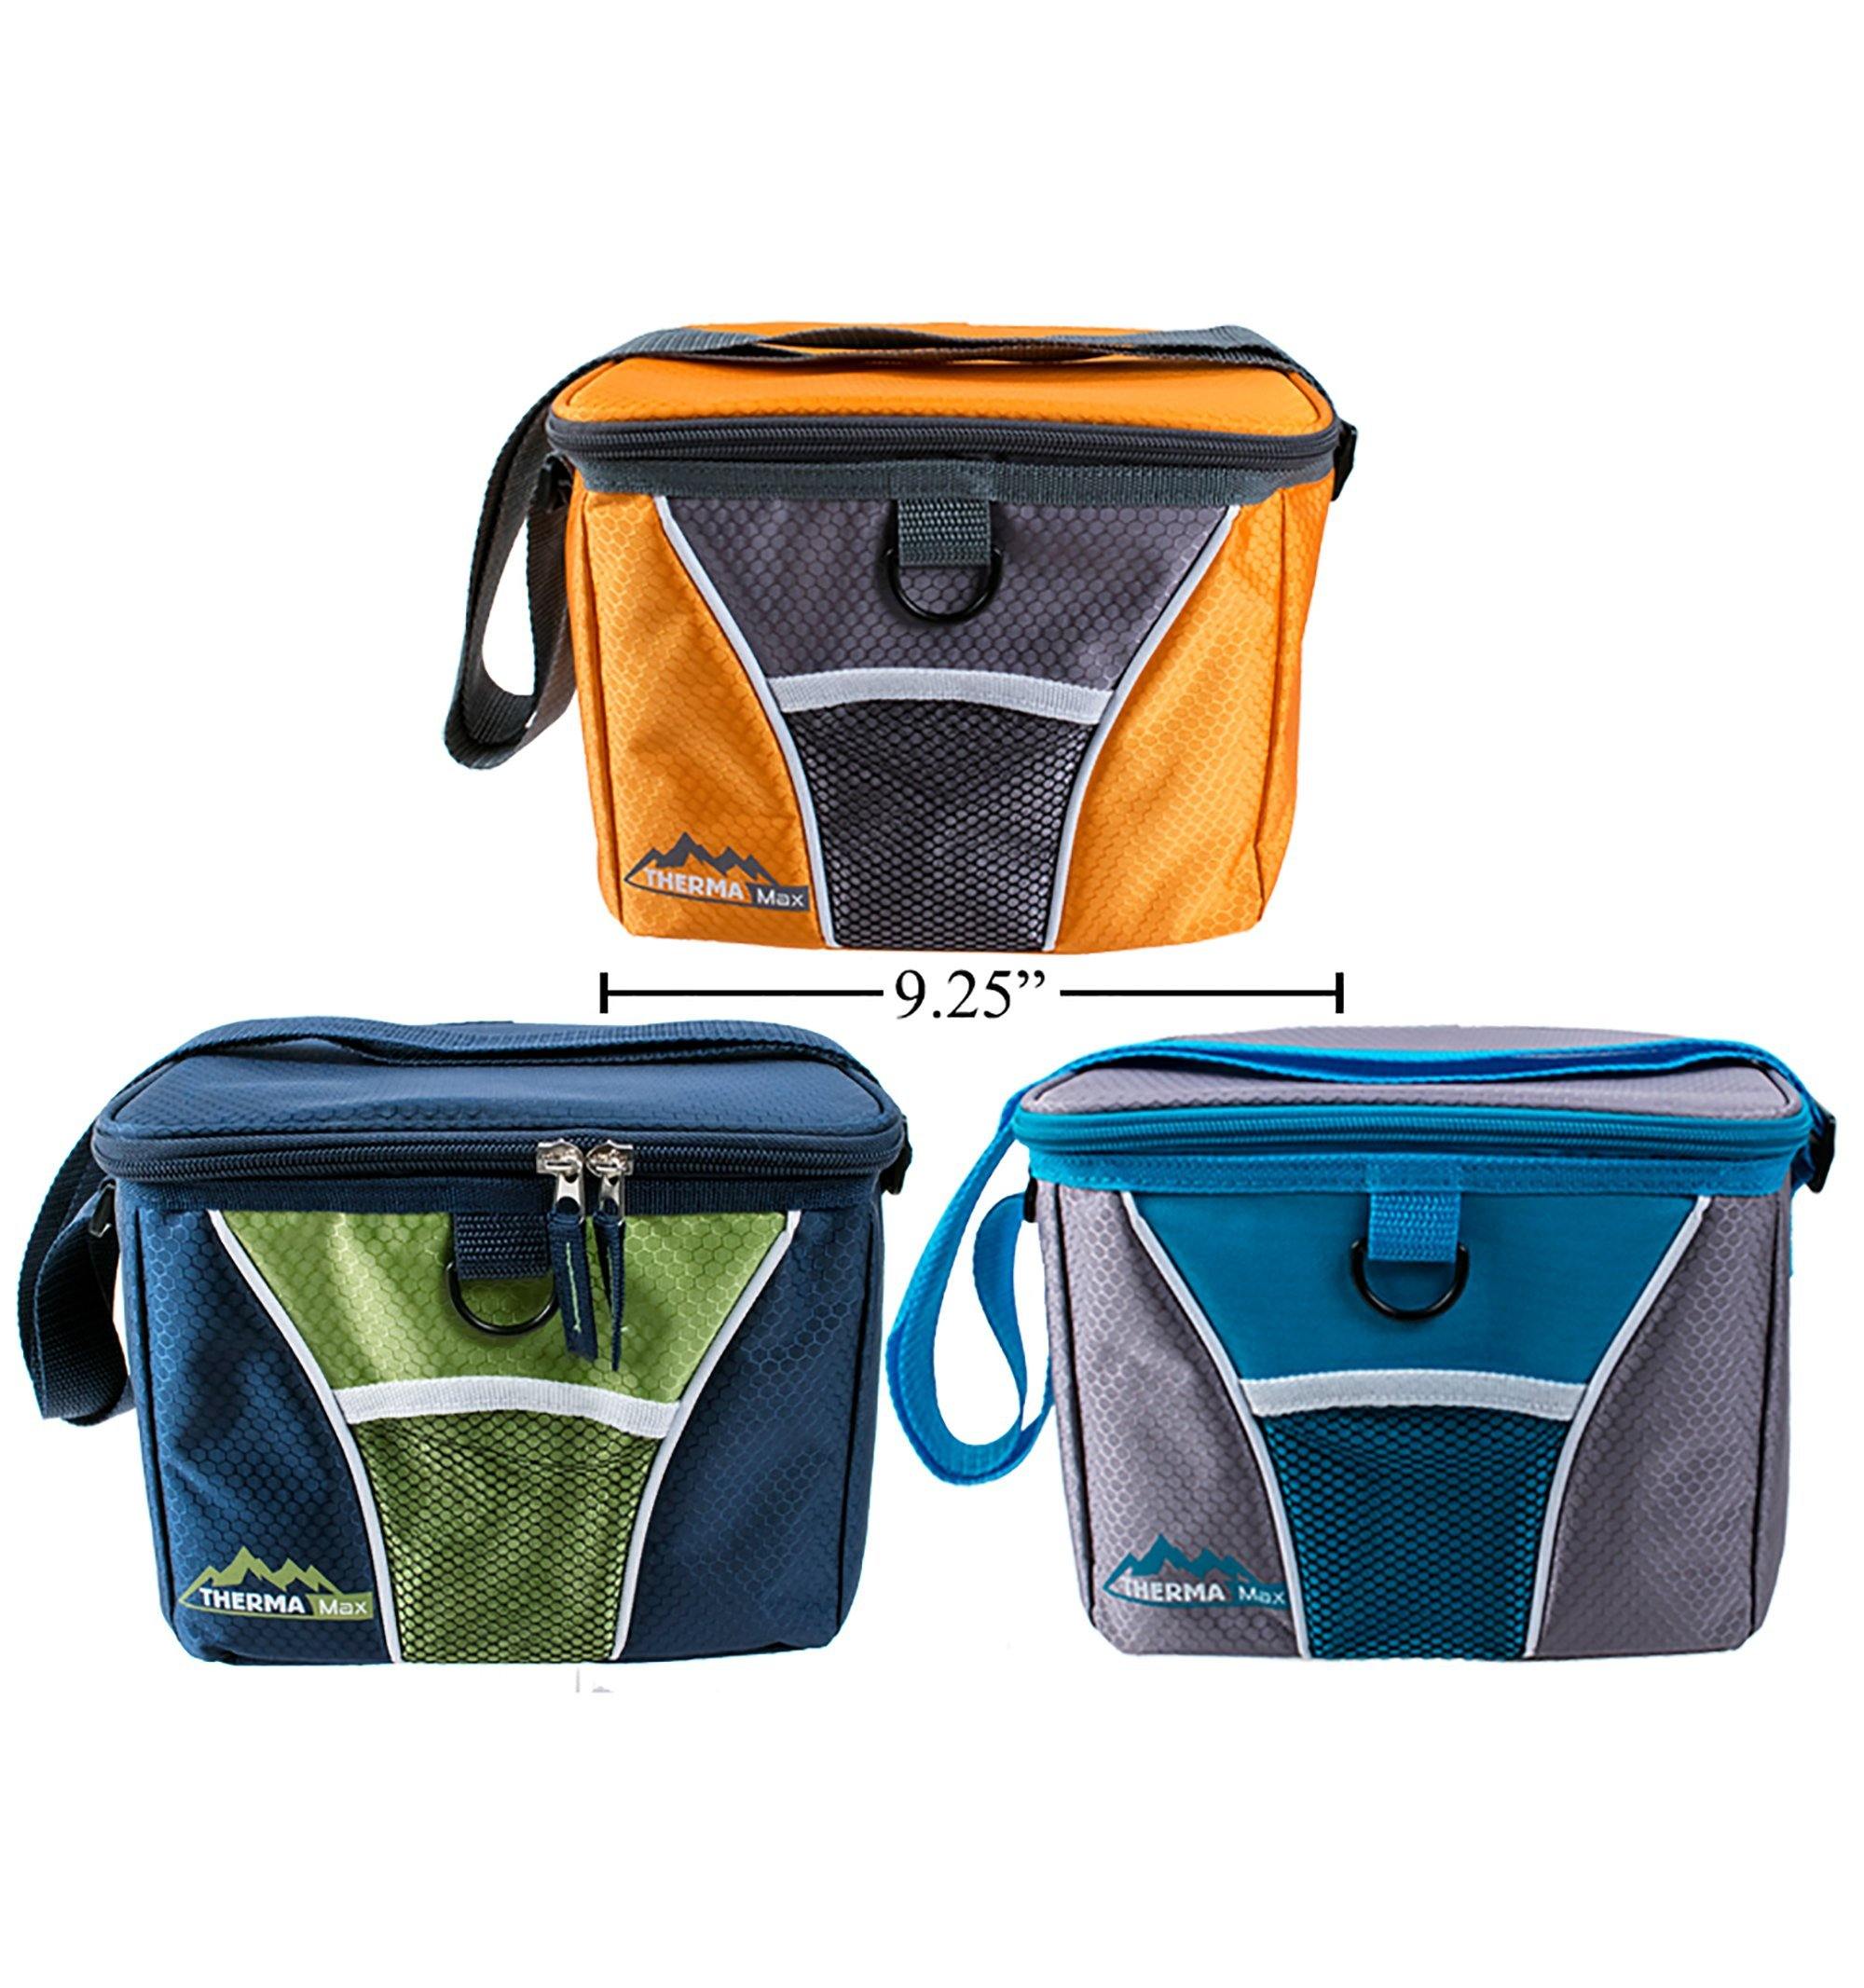 Therma Max Insulated Lunch Cooler - Dollar Max Dépôt